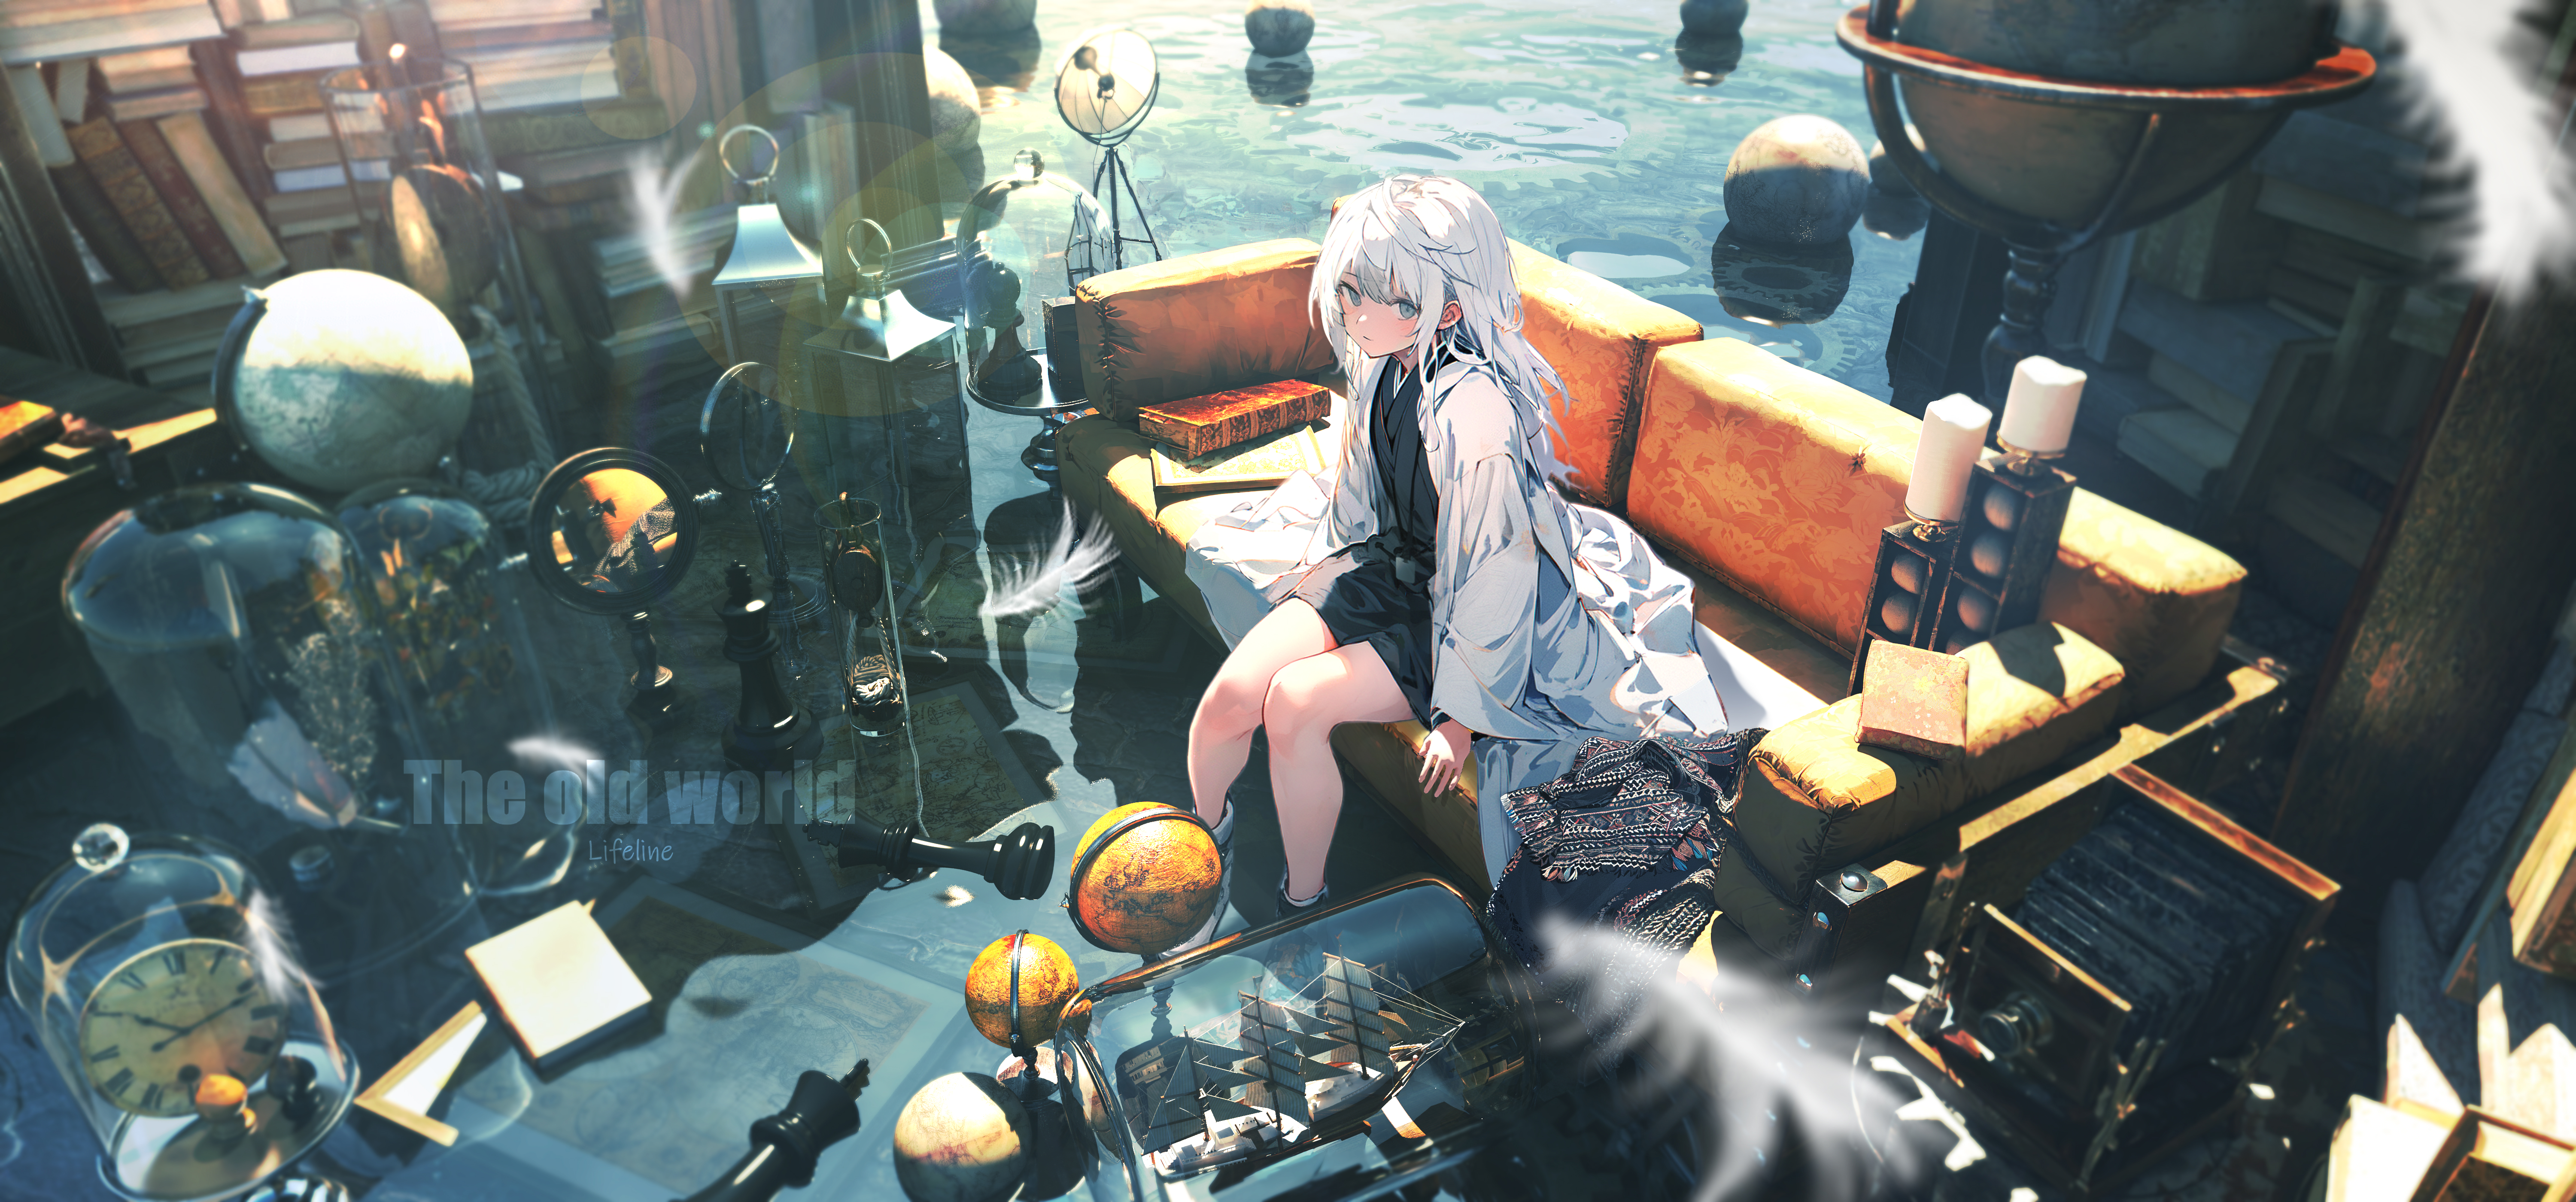 Anime 6000x2800 Lifeline looking at viewer sitting couch books clocks dress water camera long sleeves outdoors high angle white hair blue eyes long hair bottles